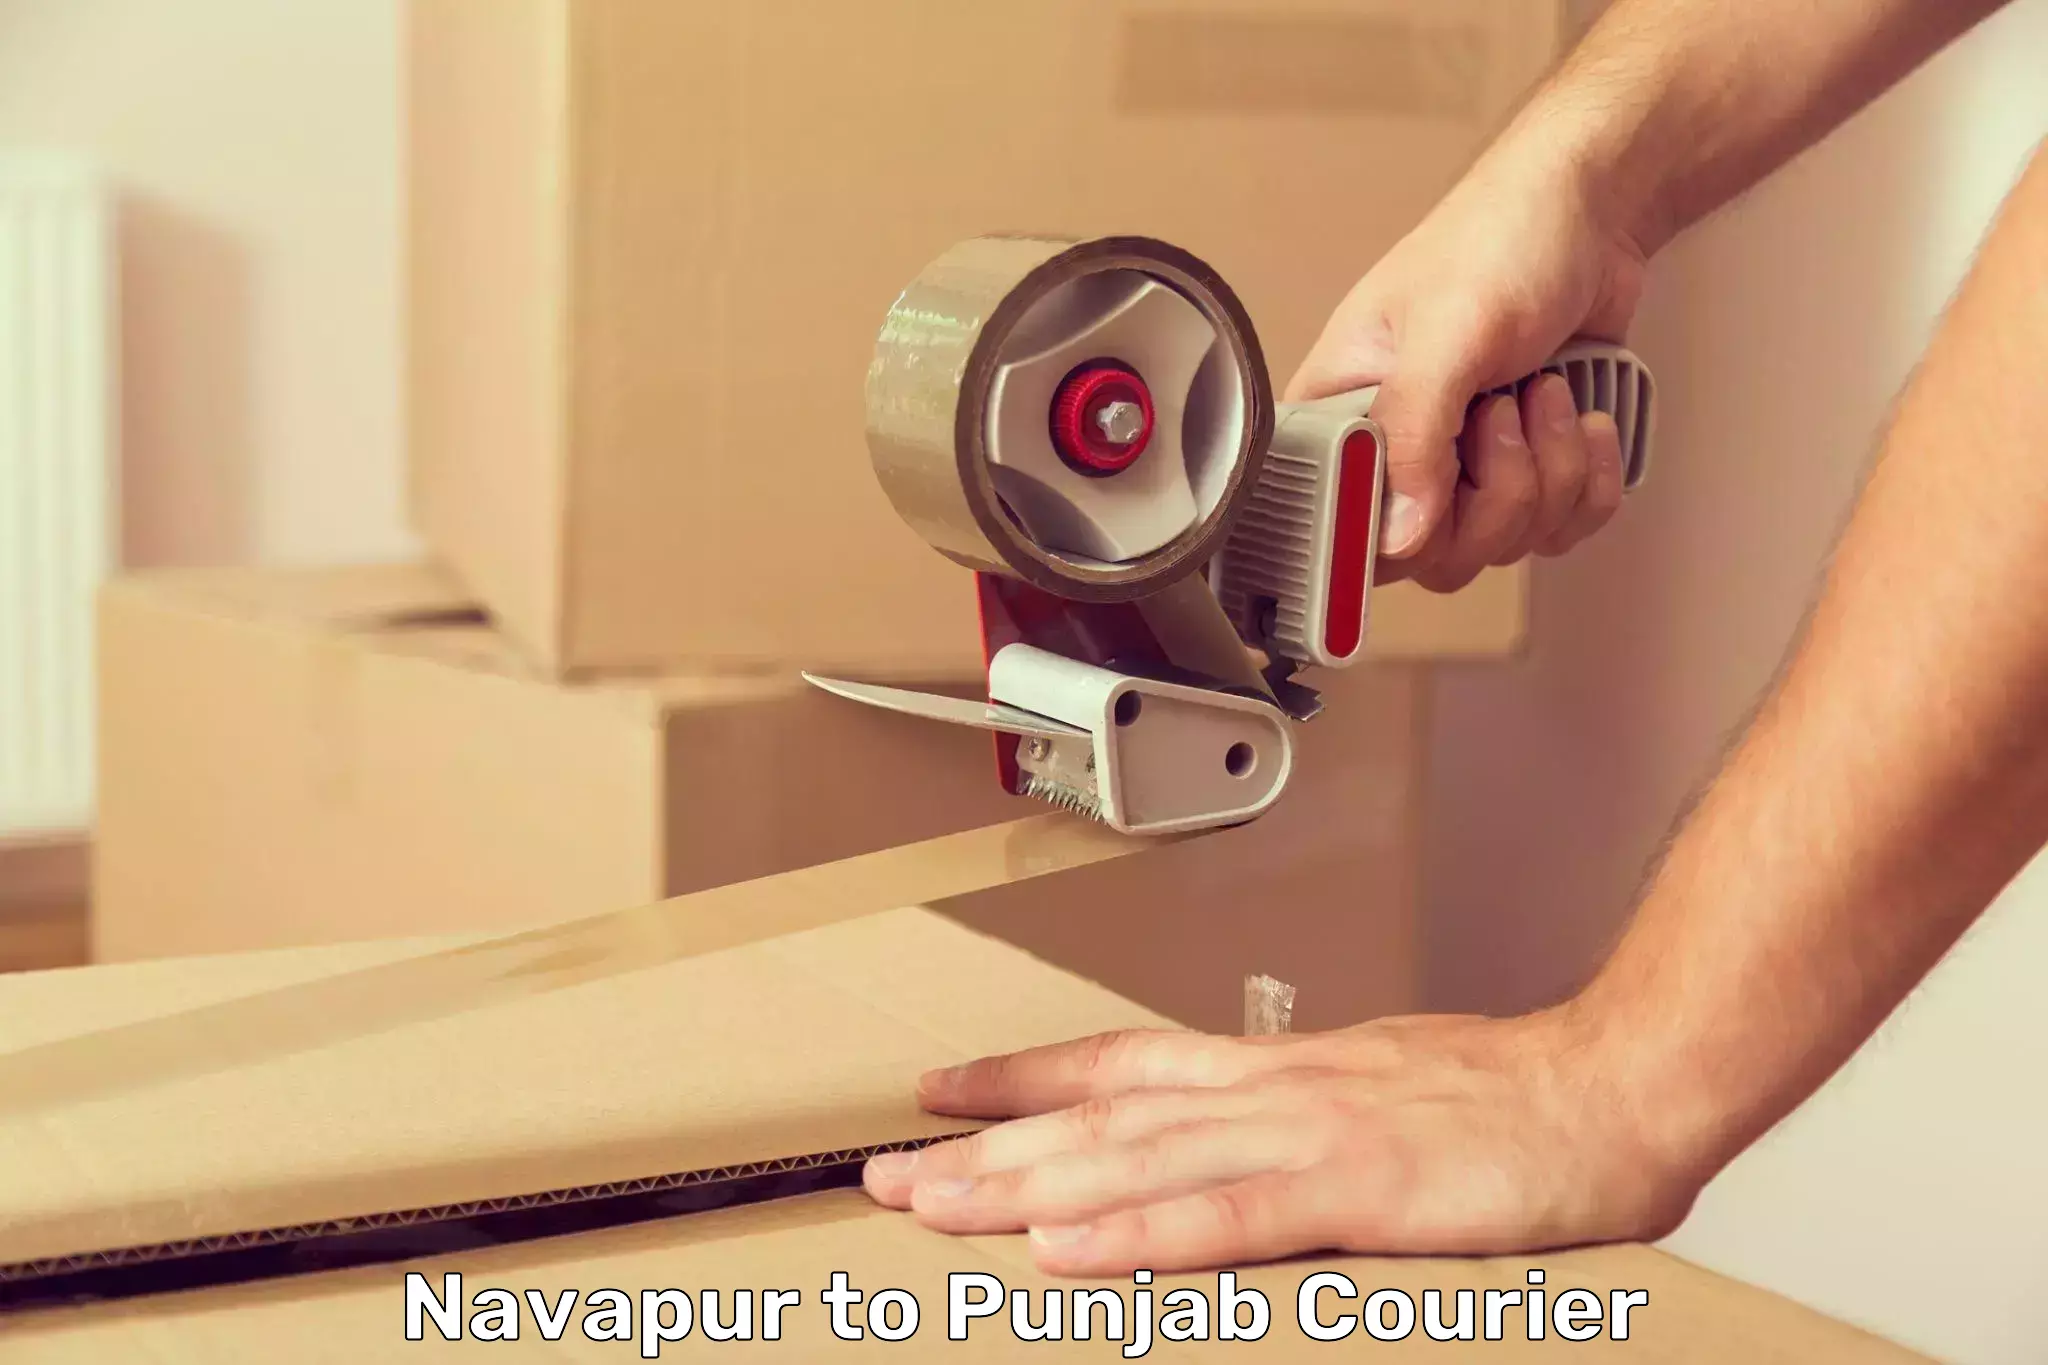 Fast delivery service Navapur to Punjab